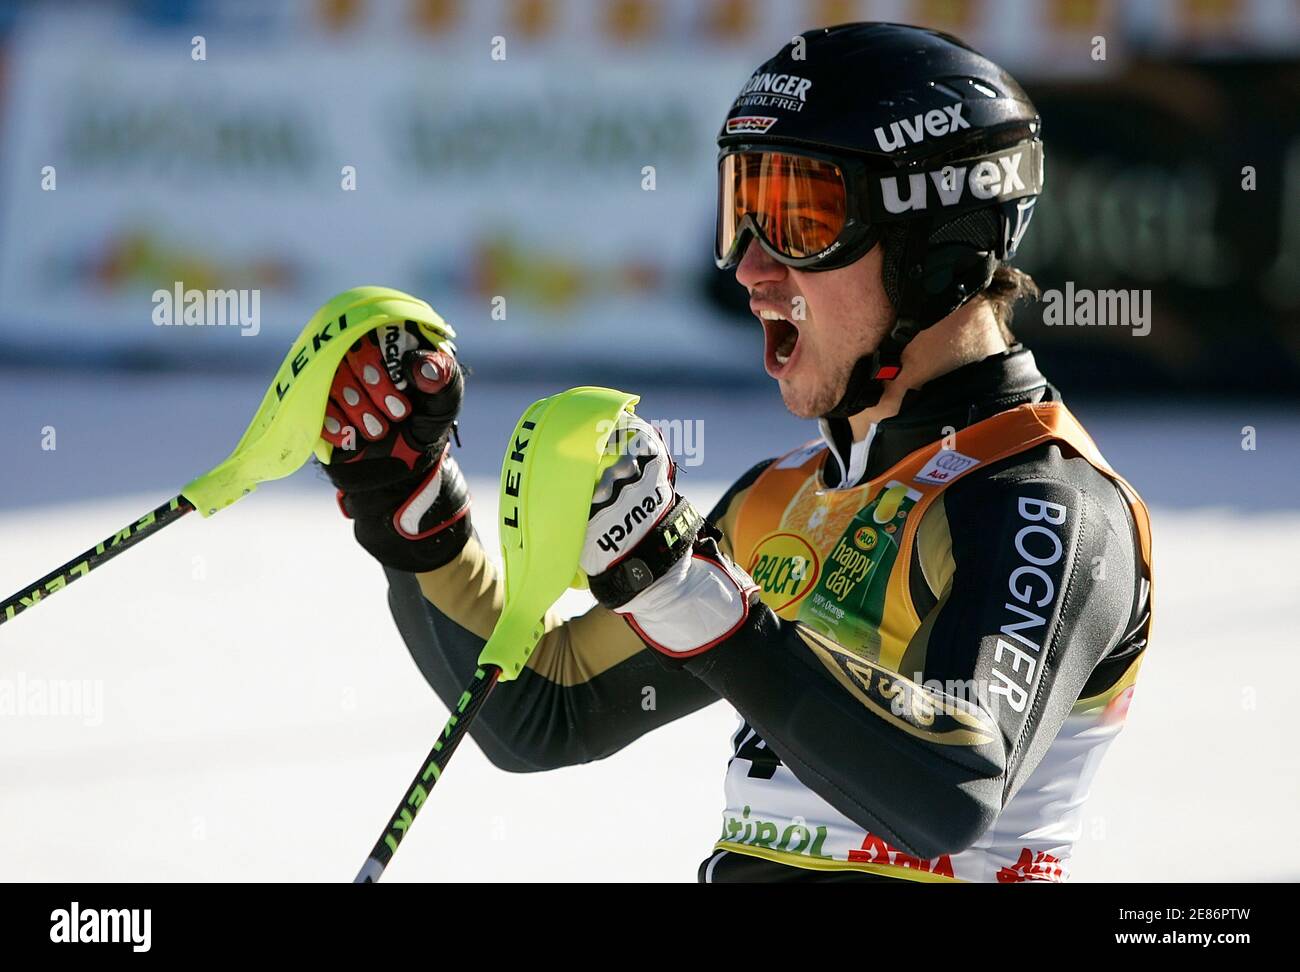 Germany's Felix Neureuther reacts after crossing the finish line and taking second place in the Val Badia Men's Slalom Ski World Cup in Val Badia December 17, 2007. France's Jean-Baptiste Grange won ahead of Neureuther and Ted Ligety of the U.S. was third.     REUTERS/Alessandro Bianchi   (ITALY) Stock Photo